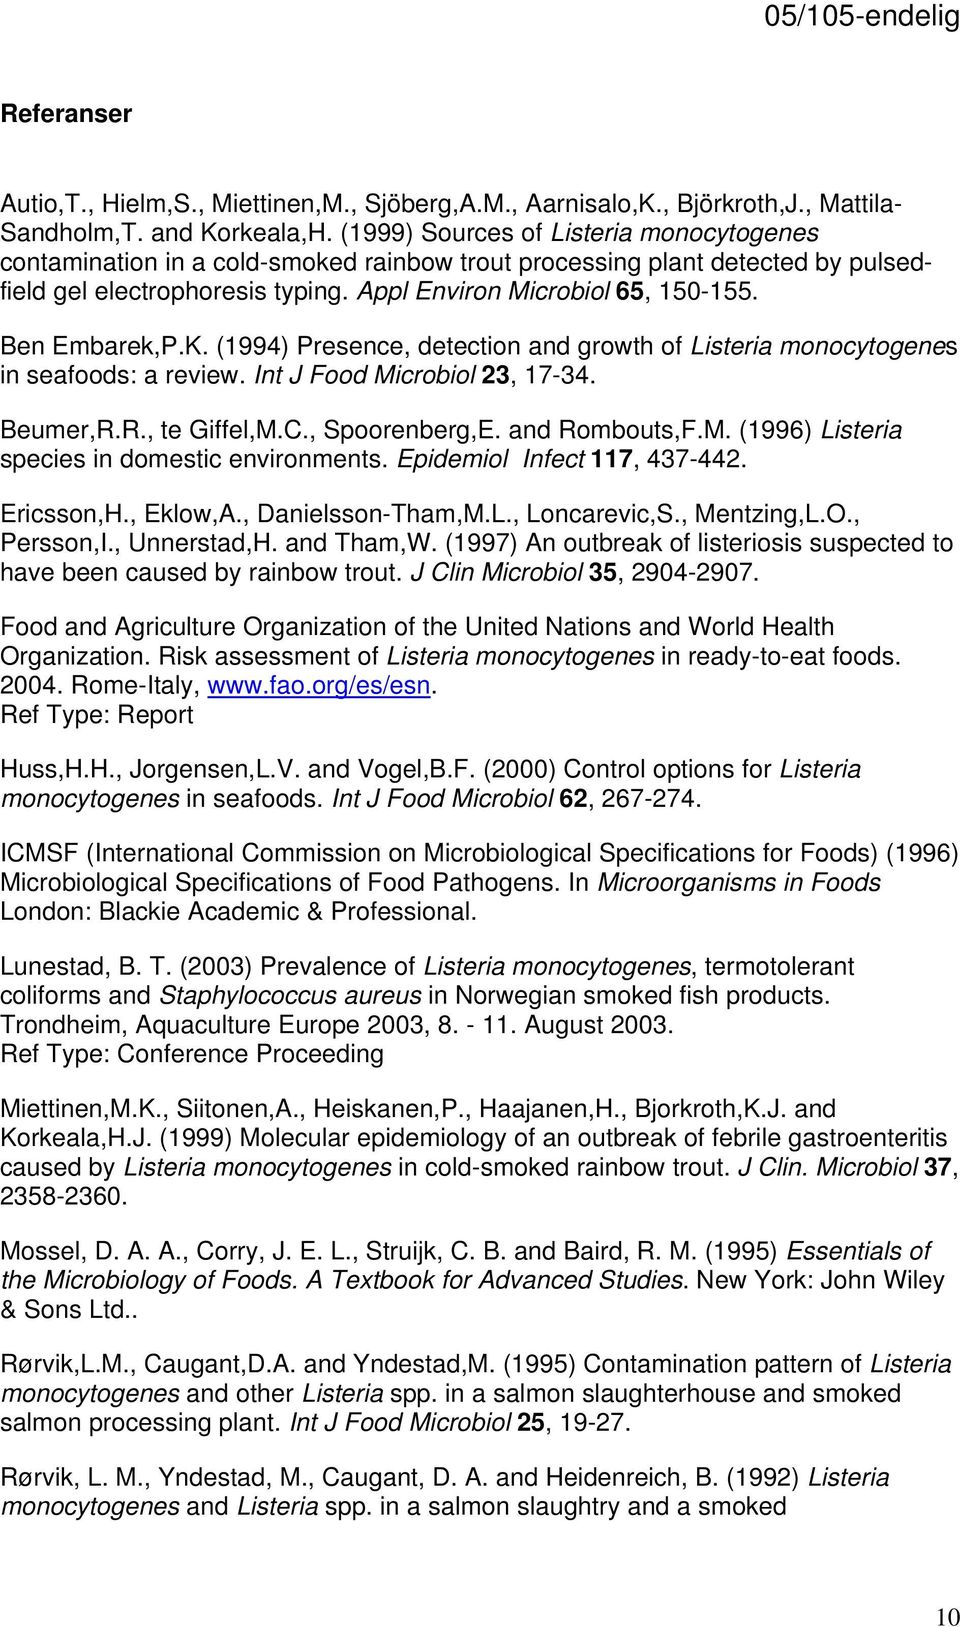 Ben Embarek,P.K. (1994) Presence, detection and growth of Listeria monocytogenes in seafoods: a review. Int J Food Microbiol 23, 17-34. Beumer,R.R., te Giffel,M.C., Spoorenberg,E. and Rombouts,F.M. (1996) Listeria species in domestic environments.